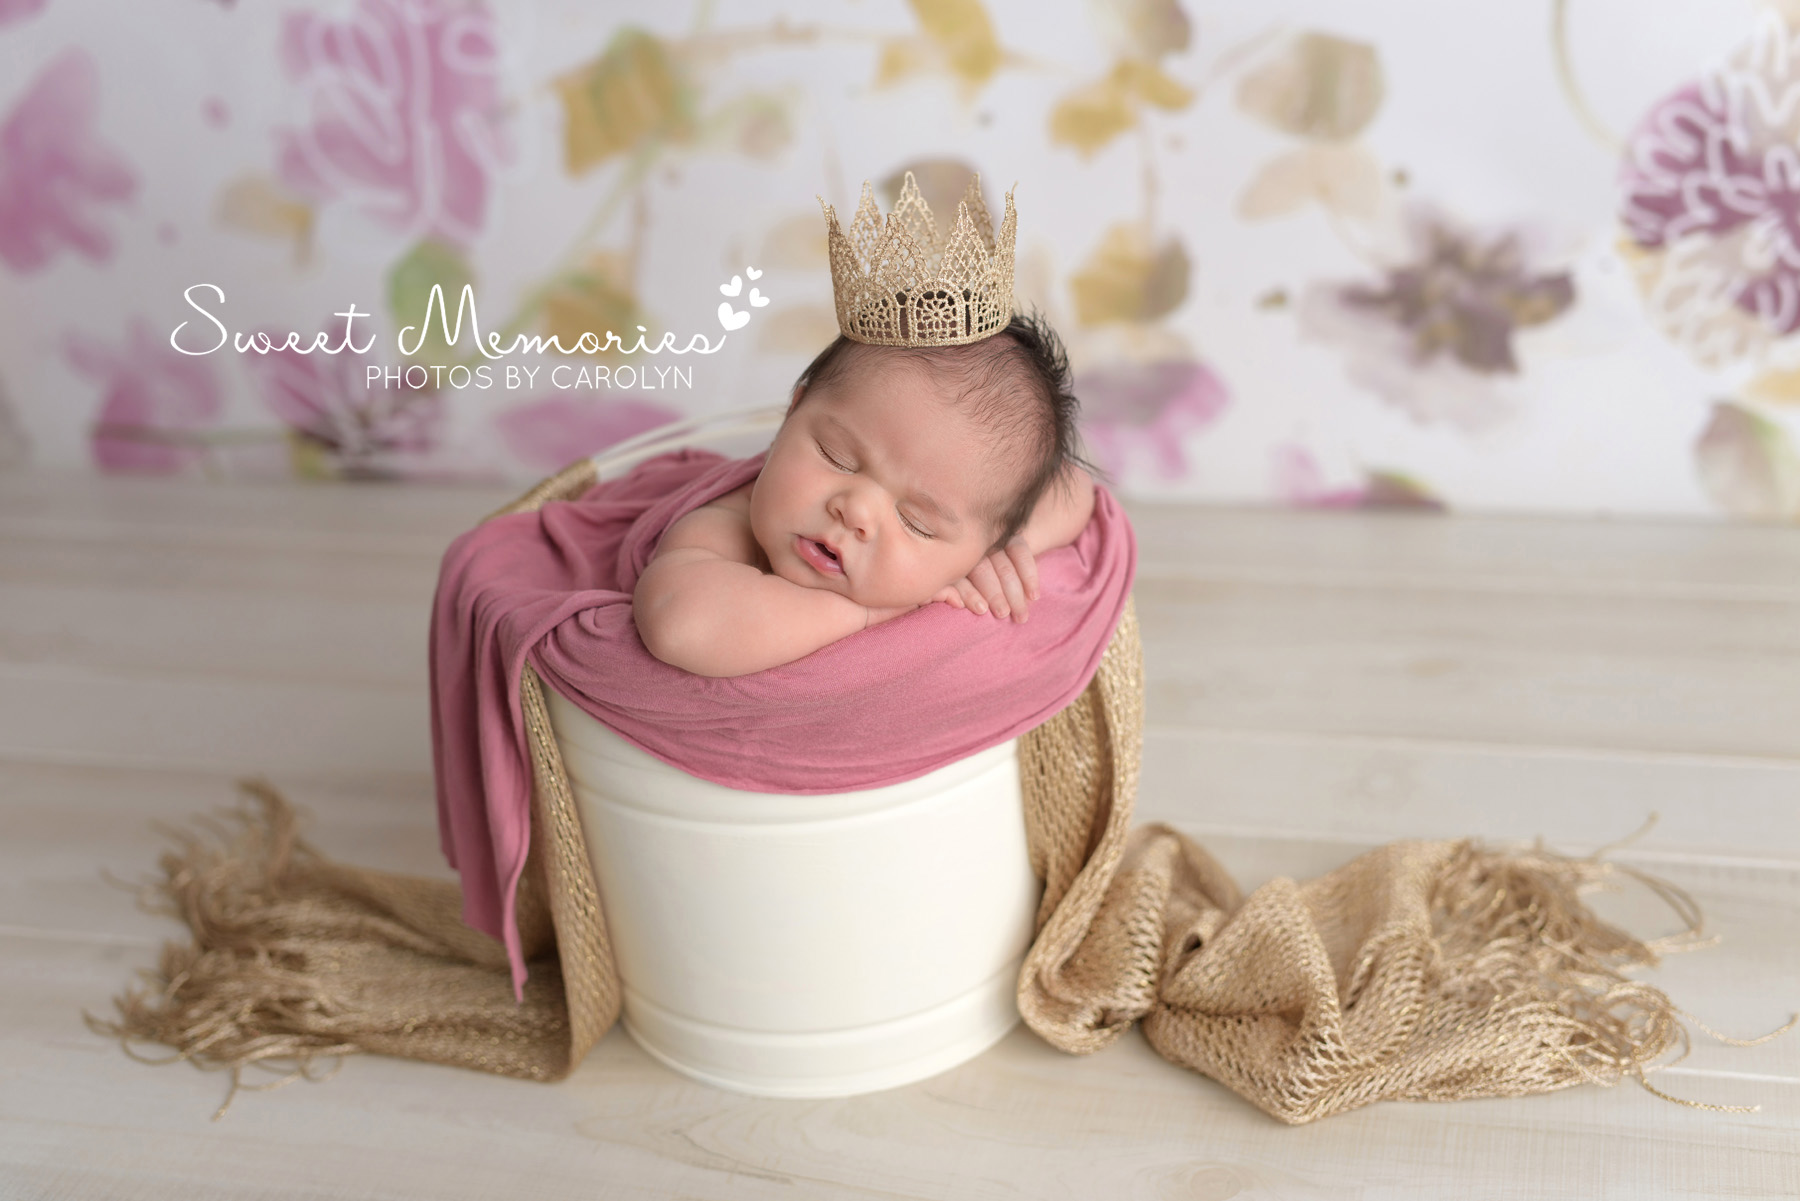 newborn baby girl in bucket pose with pink and gold crown | Coopersburg newborn photographer | Sweet Memories Photos by Carolyn Quakertown Pennsylvania